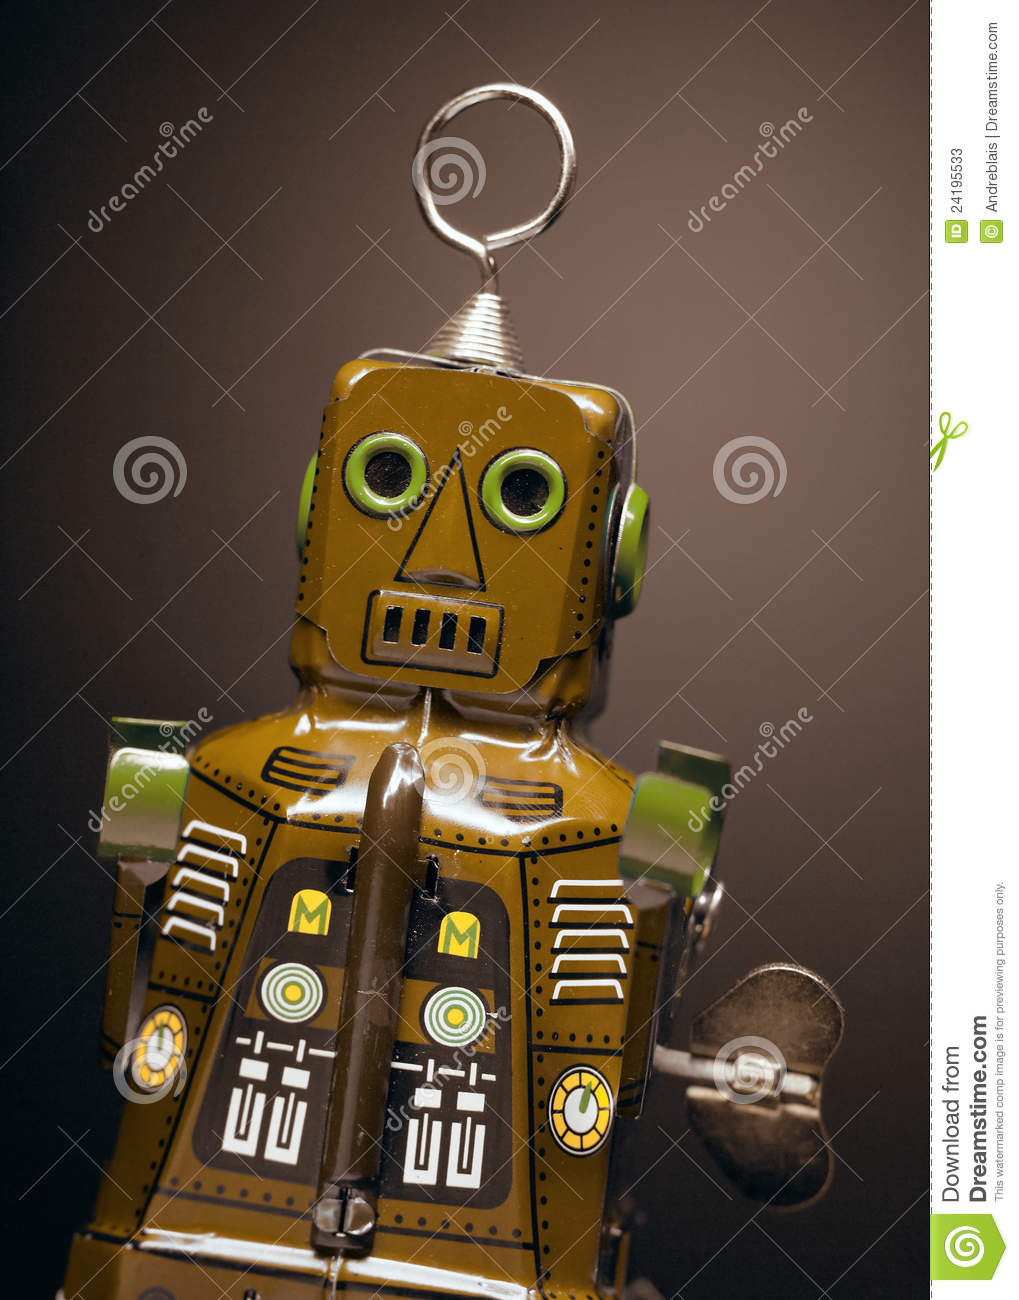 Old Toy Robot Stock Photos   Image  24195533